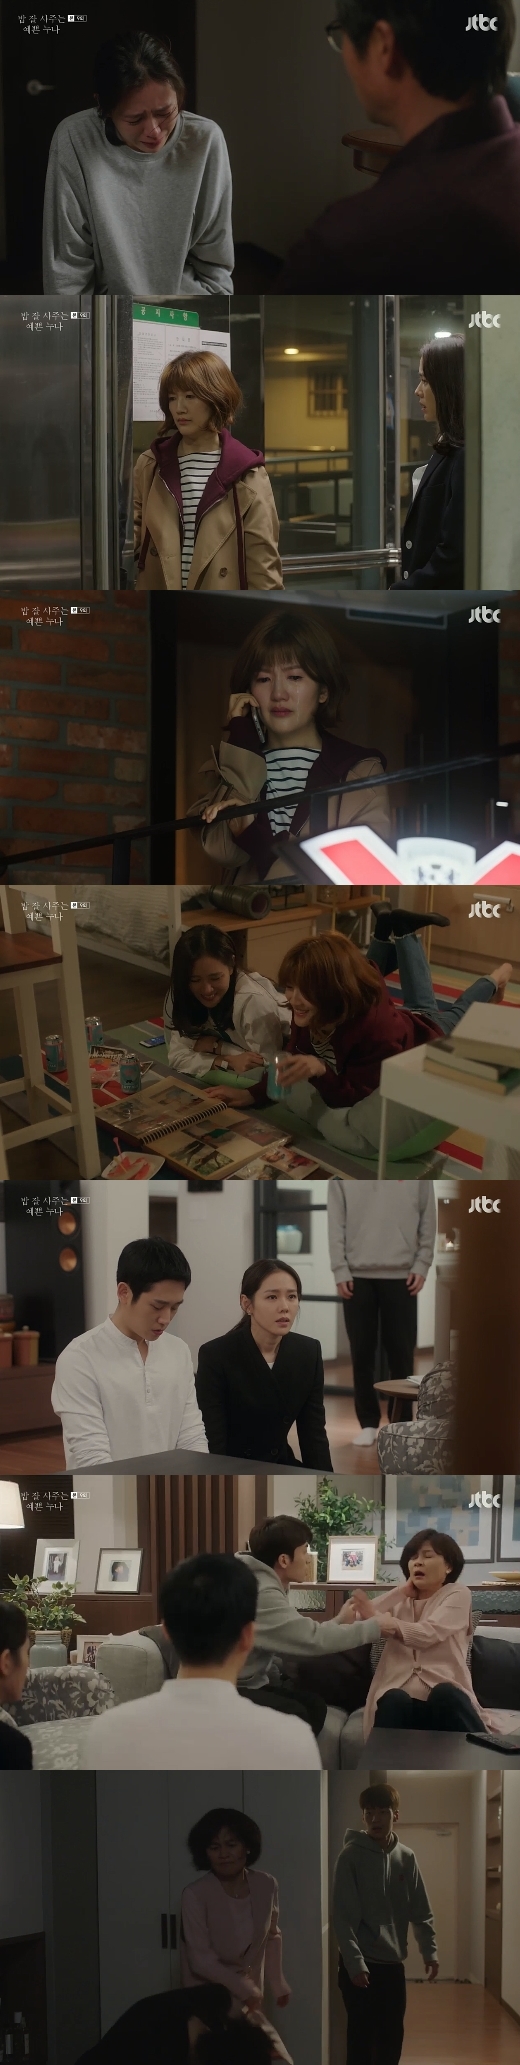 Son Ye-jin and Jung Hae In of Bob Good Sister finally revealed their devotion.On the night of the 27th, JTBCs Golden Toe Drama, A Pretty Sister Who Buys Rice (played by Kim Eun, director Ahn Pan-seok) was broadcast 9 times.In the ninth episode, Yoon Jin-ah and Seo Jun-hee were shown revealing their devotion to their families.The biggest challenge between Yoon Jin-ah and Seo Jun-hee couple has been considered Kim Miyeon (Gil Hae-yeon).Yoon Jin-ahs father, Yoon Sang (Oman Seok) and Seo Jun-hees sister and Yoon Jin-ahs friend, Seo Kyung-sun (So Ji-yeon), accepted the relationship between the two, but Yoon Jin-ahs mother Kim Miyeon was furious by catching the back.In the trailer released at the end of the broadcast, Yoon Jin-a and Seo Jun-hee, who faced the difficulty of Kim Miyeon as expected, were included.Kim Miyeon hit her daughter in an angry look and said, Junhee is just a man I like.He also told his son, Seo Jun-hees friend, Yoon Seung-ho, Do not meet Jun-hee in the future, and his husband, Yoon Sang, It is a matter of the rest of your daughters life.I even went to Seo Kyung-sun and said, I am you, and you are me, arent you?Yoon Jin-ah and Seo Jun-hee, who are in this situation, are expected to be strong supporters of the Yoon Sang. Yoon Jin-a told Yoon Sang, What is love?Teach me what love is. On the screen, Yoon Sang told Kim Miyeon, What is love?Do you know? He was reminded that he would be the power of his daughter.